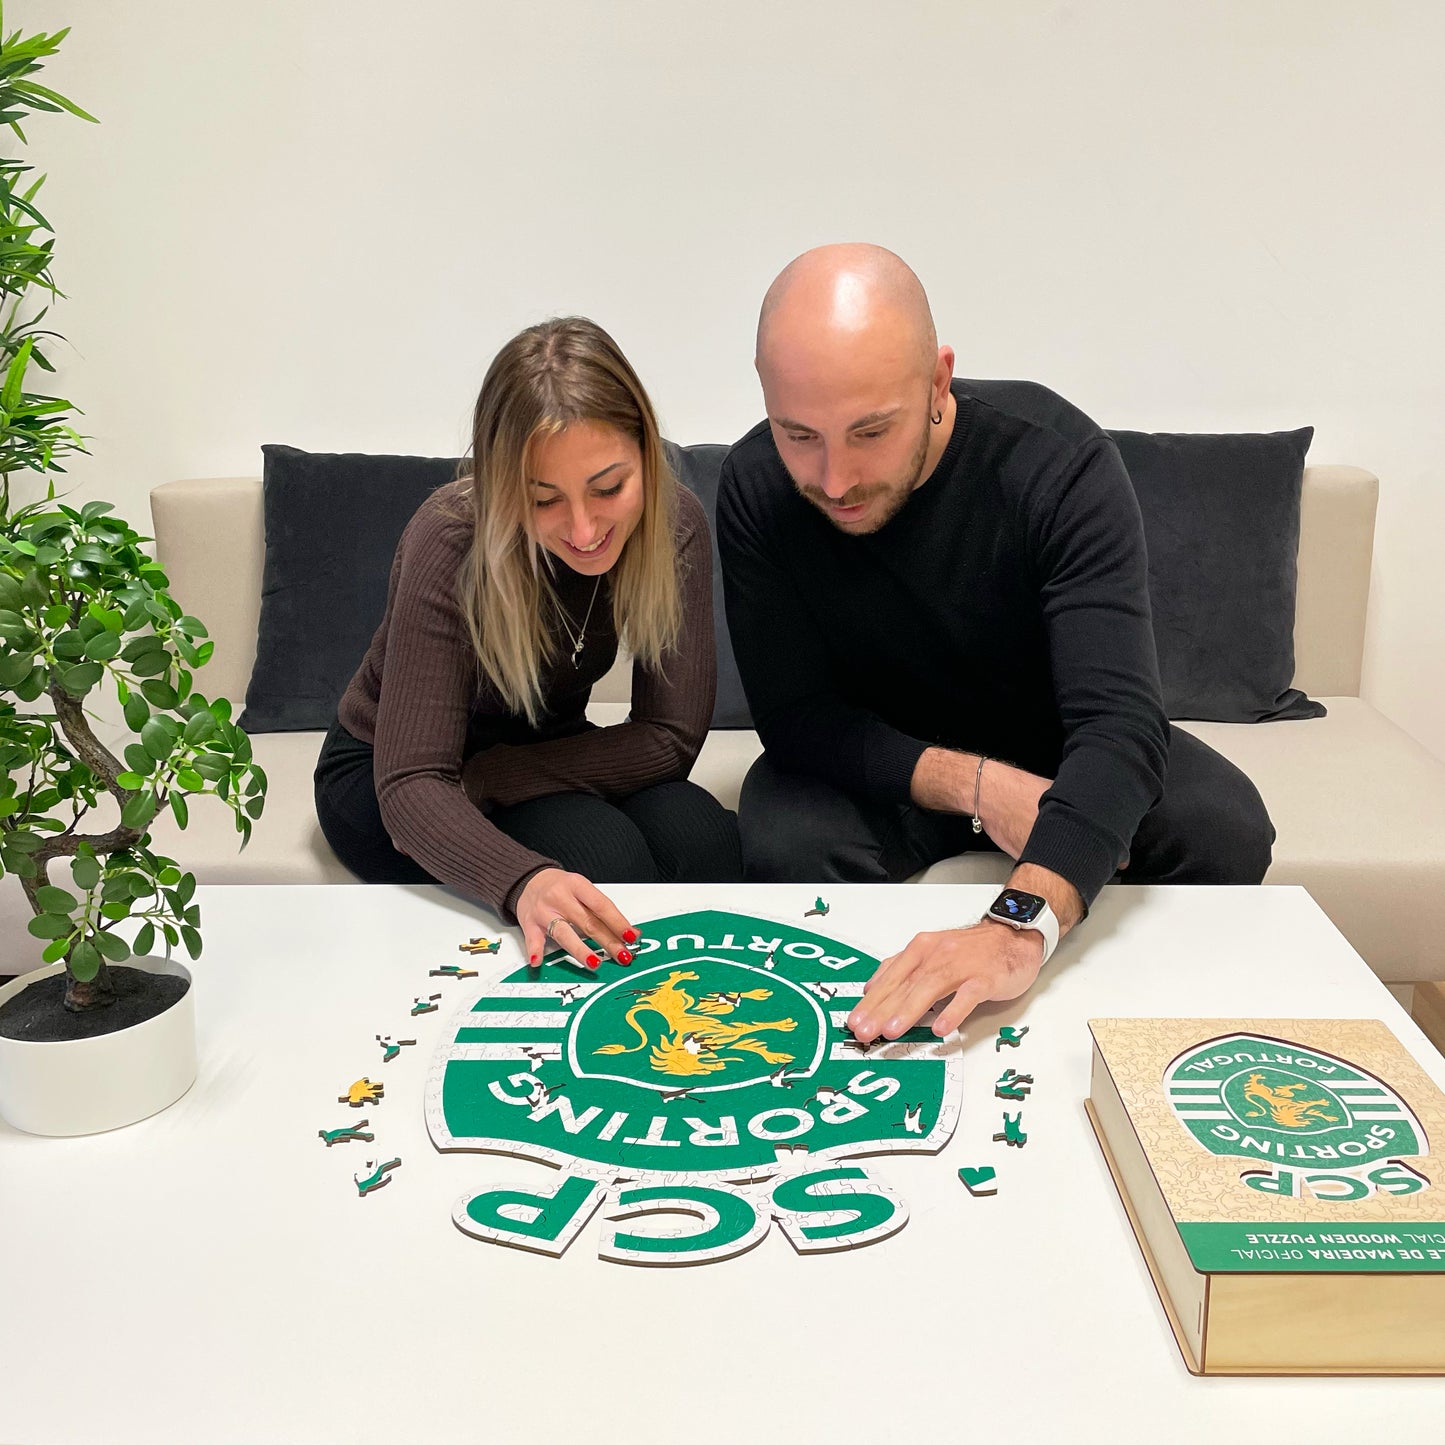 Sporting CP® Crest - Wooden Puzzle